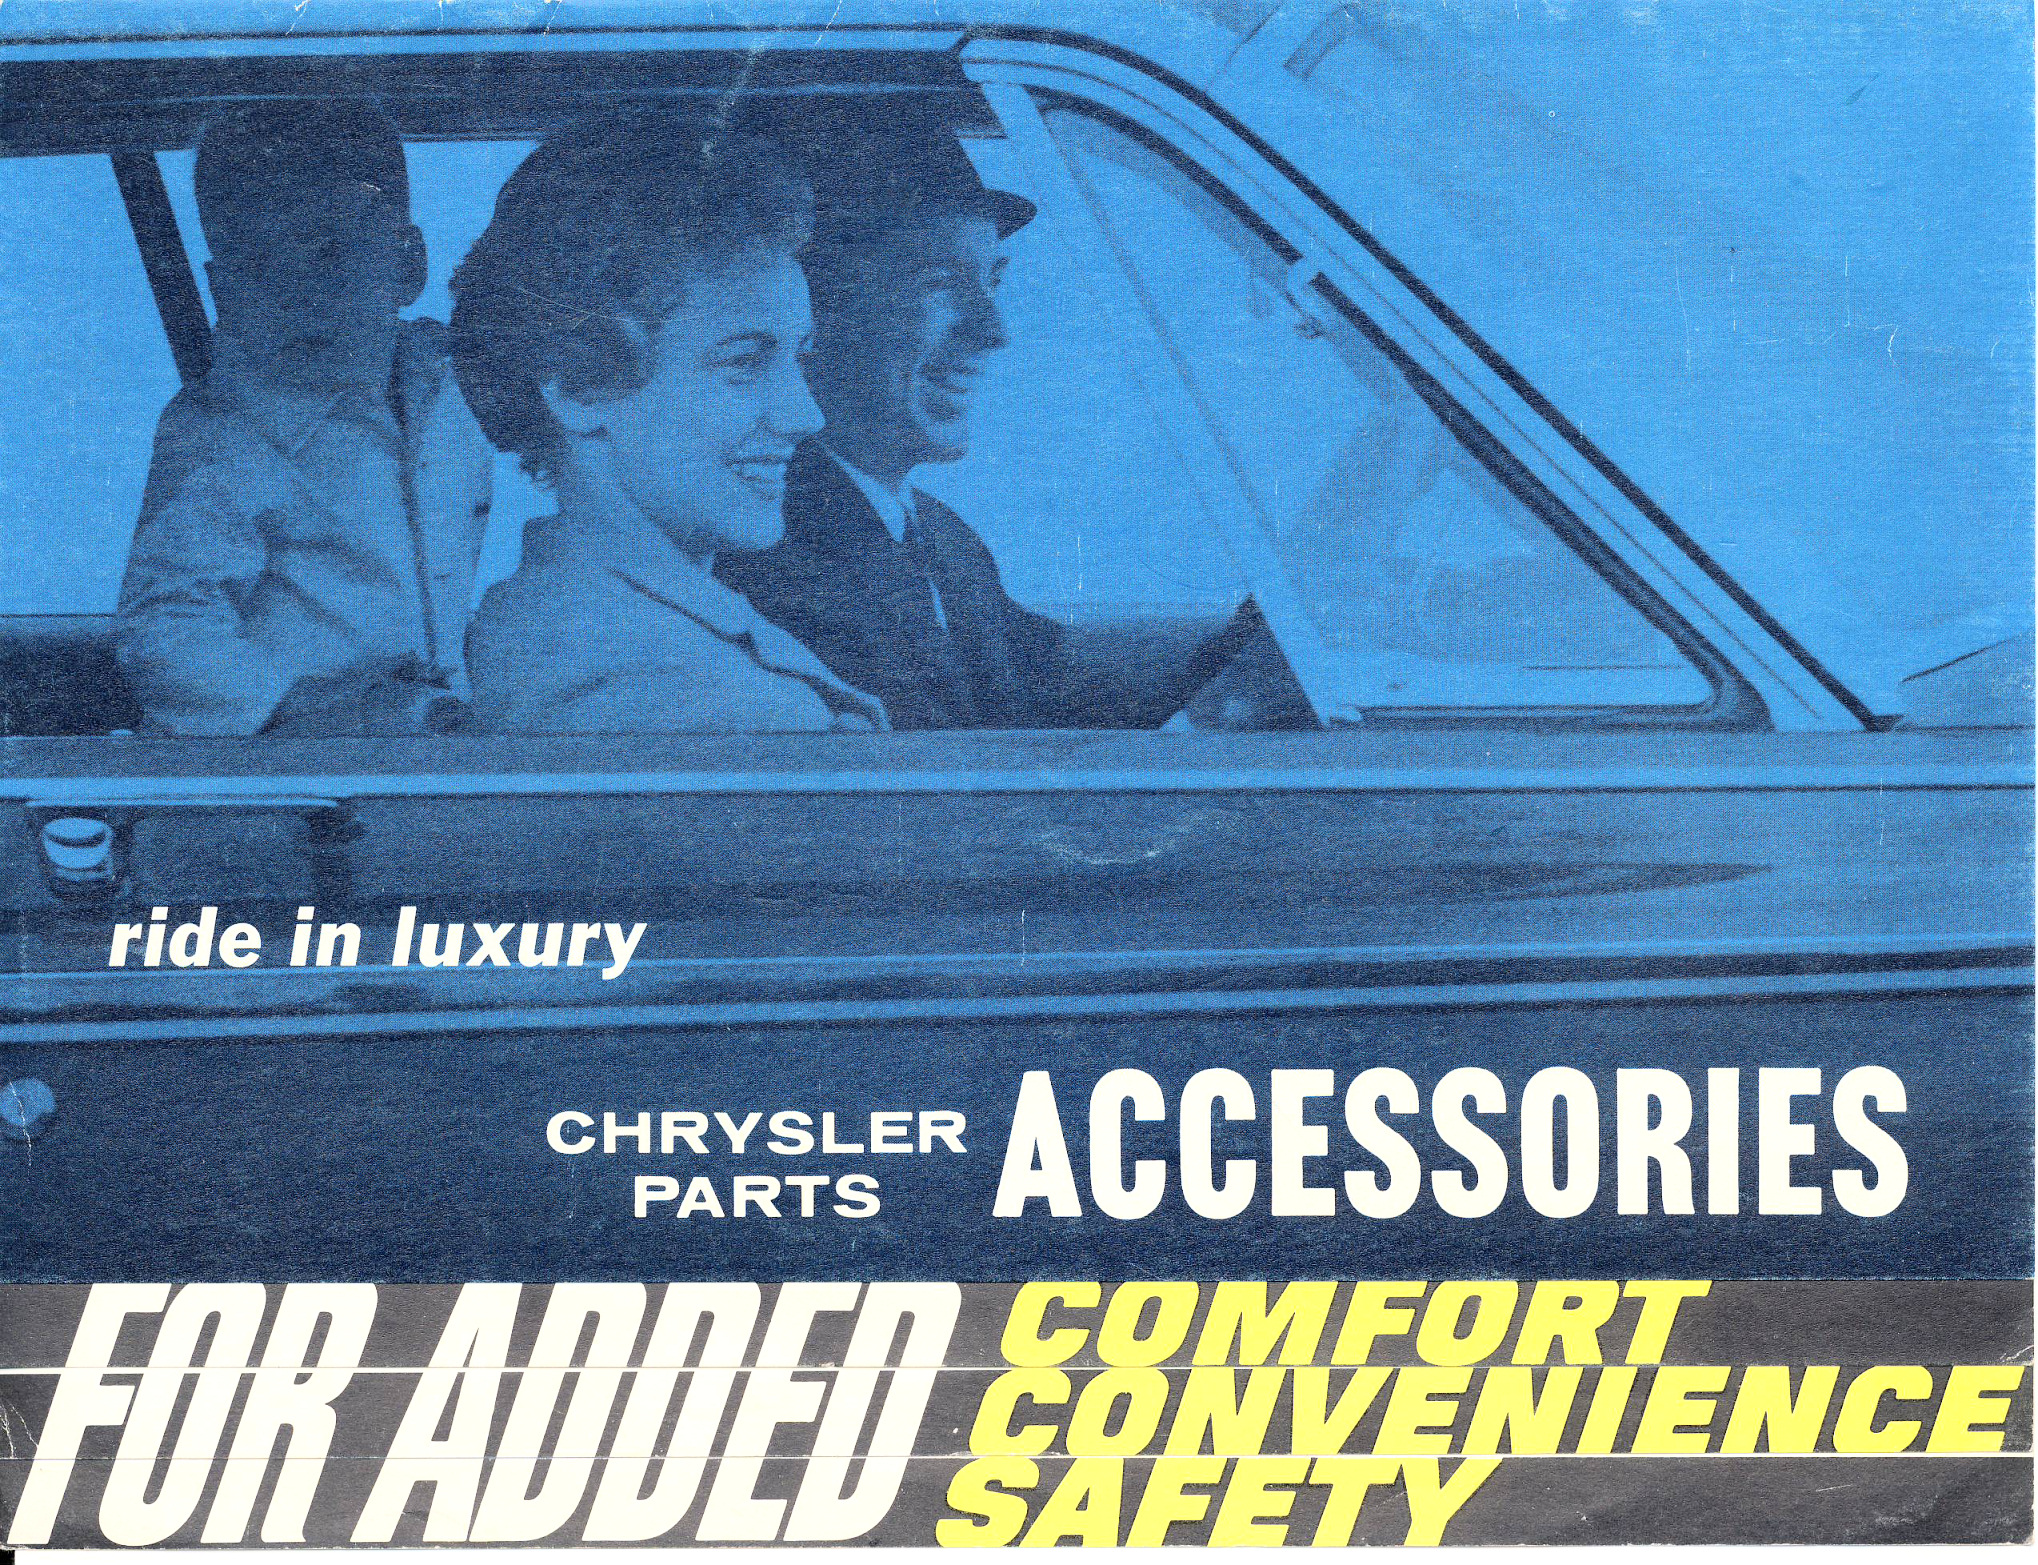 1964_Chrysler_Accessories_Booklet-01